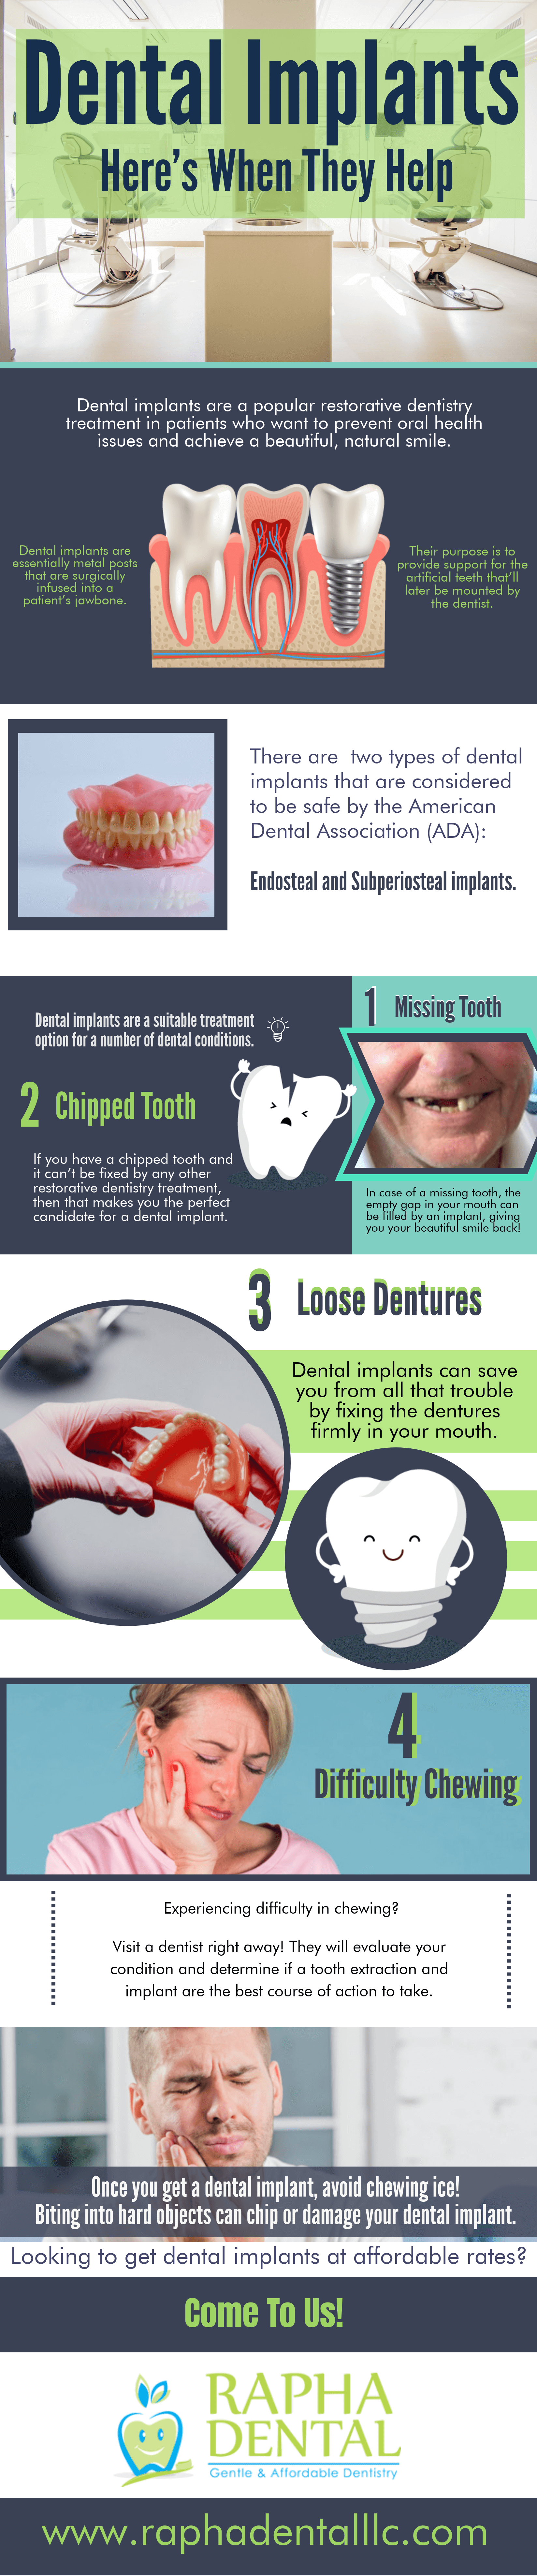 Dental Implants Here's When They Help